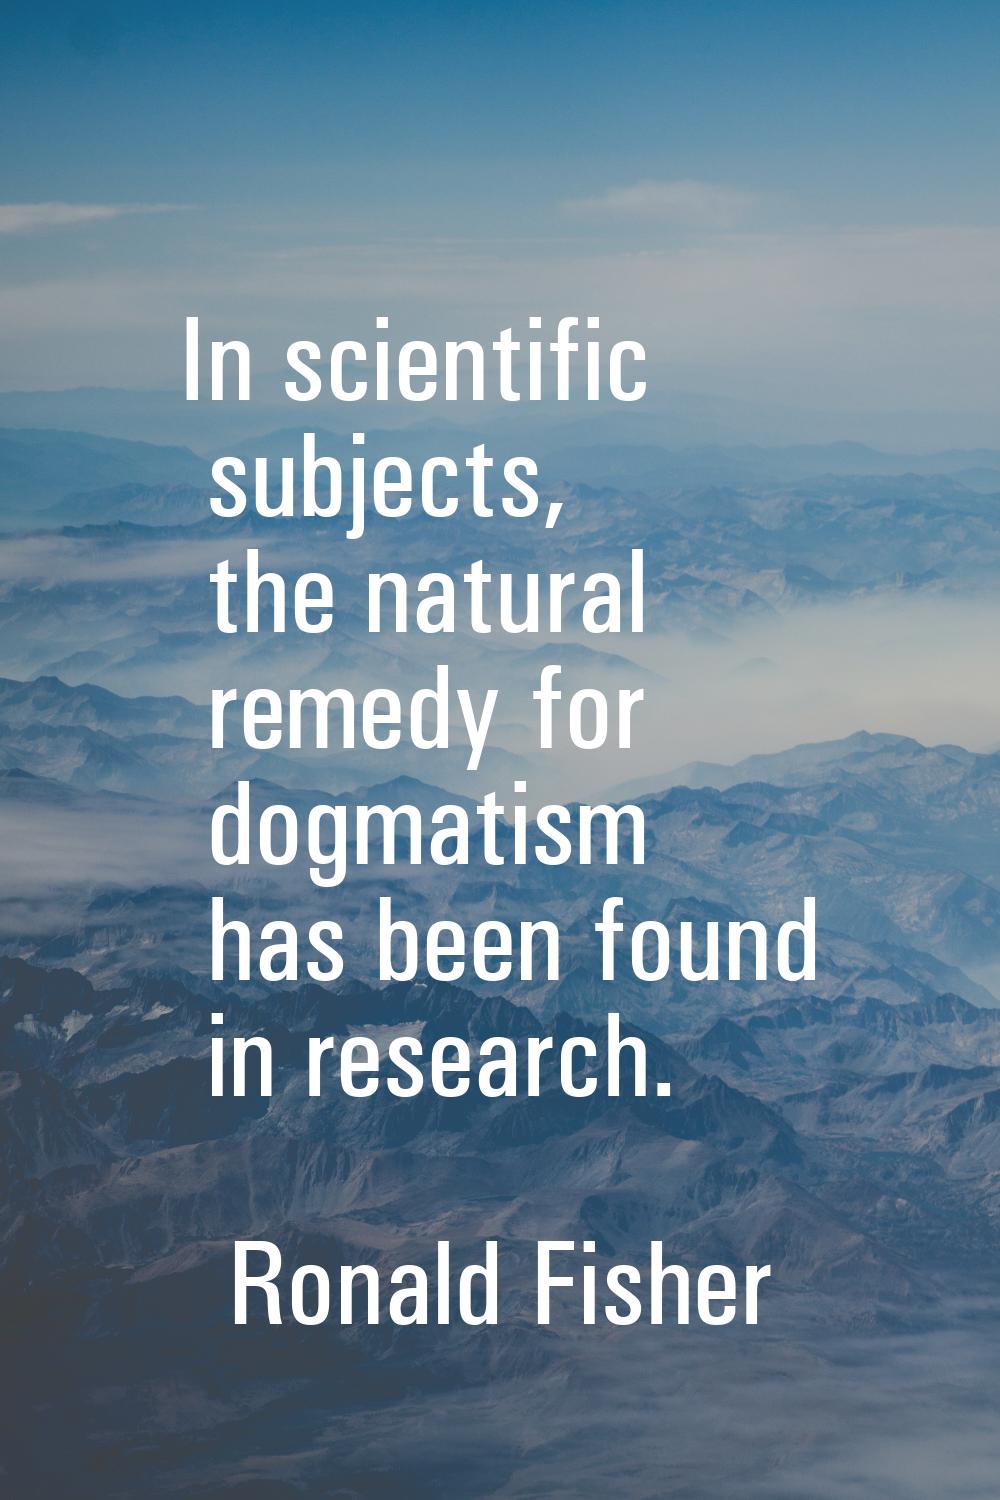 In scientific subjects, the natural remedy for dogmatism has been found in research.